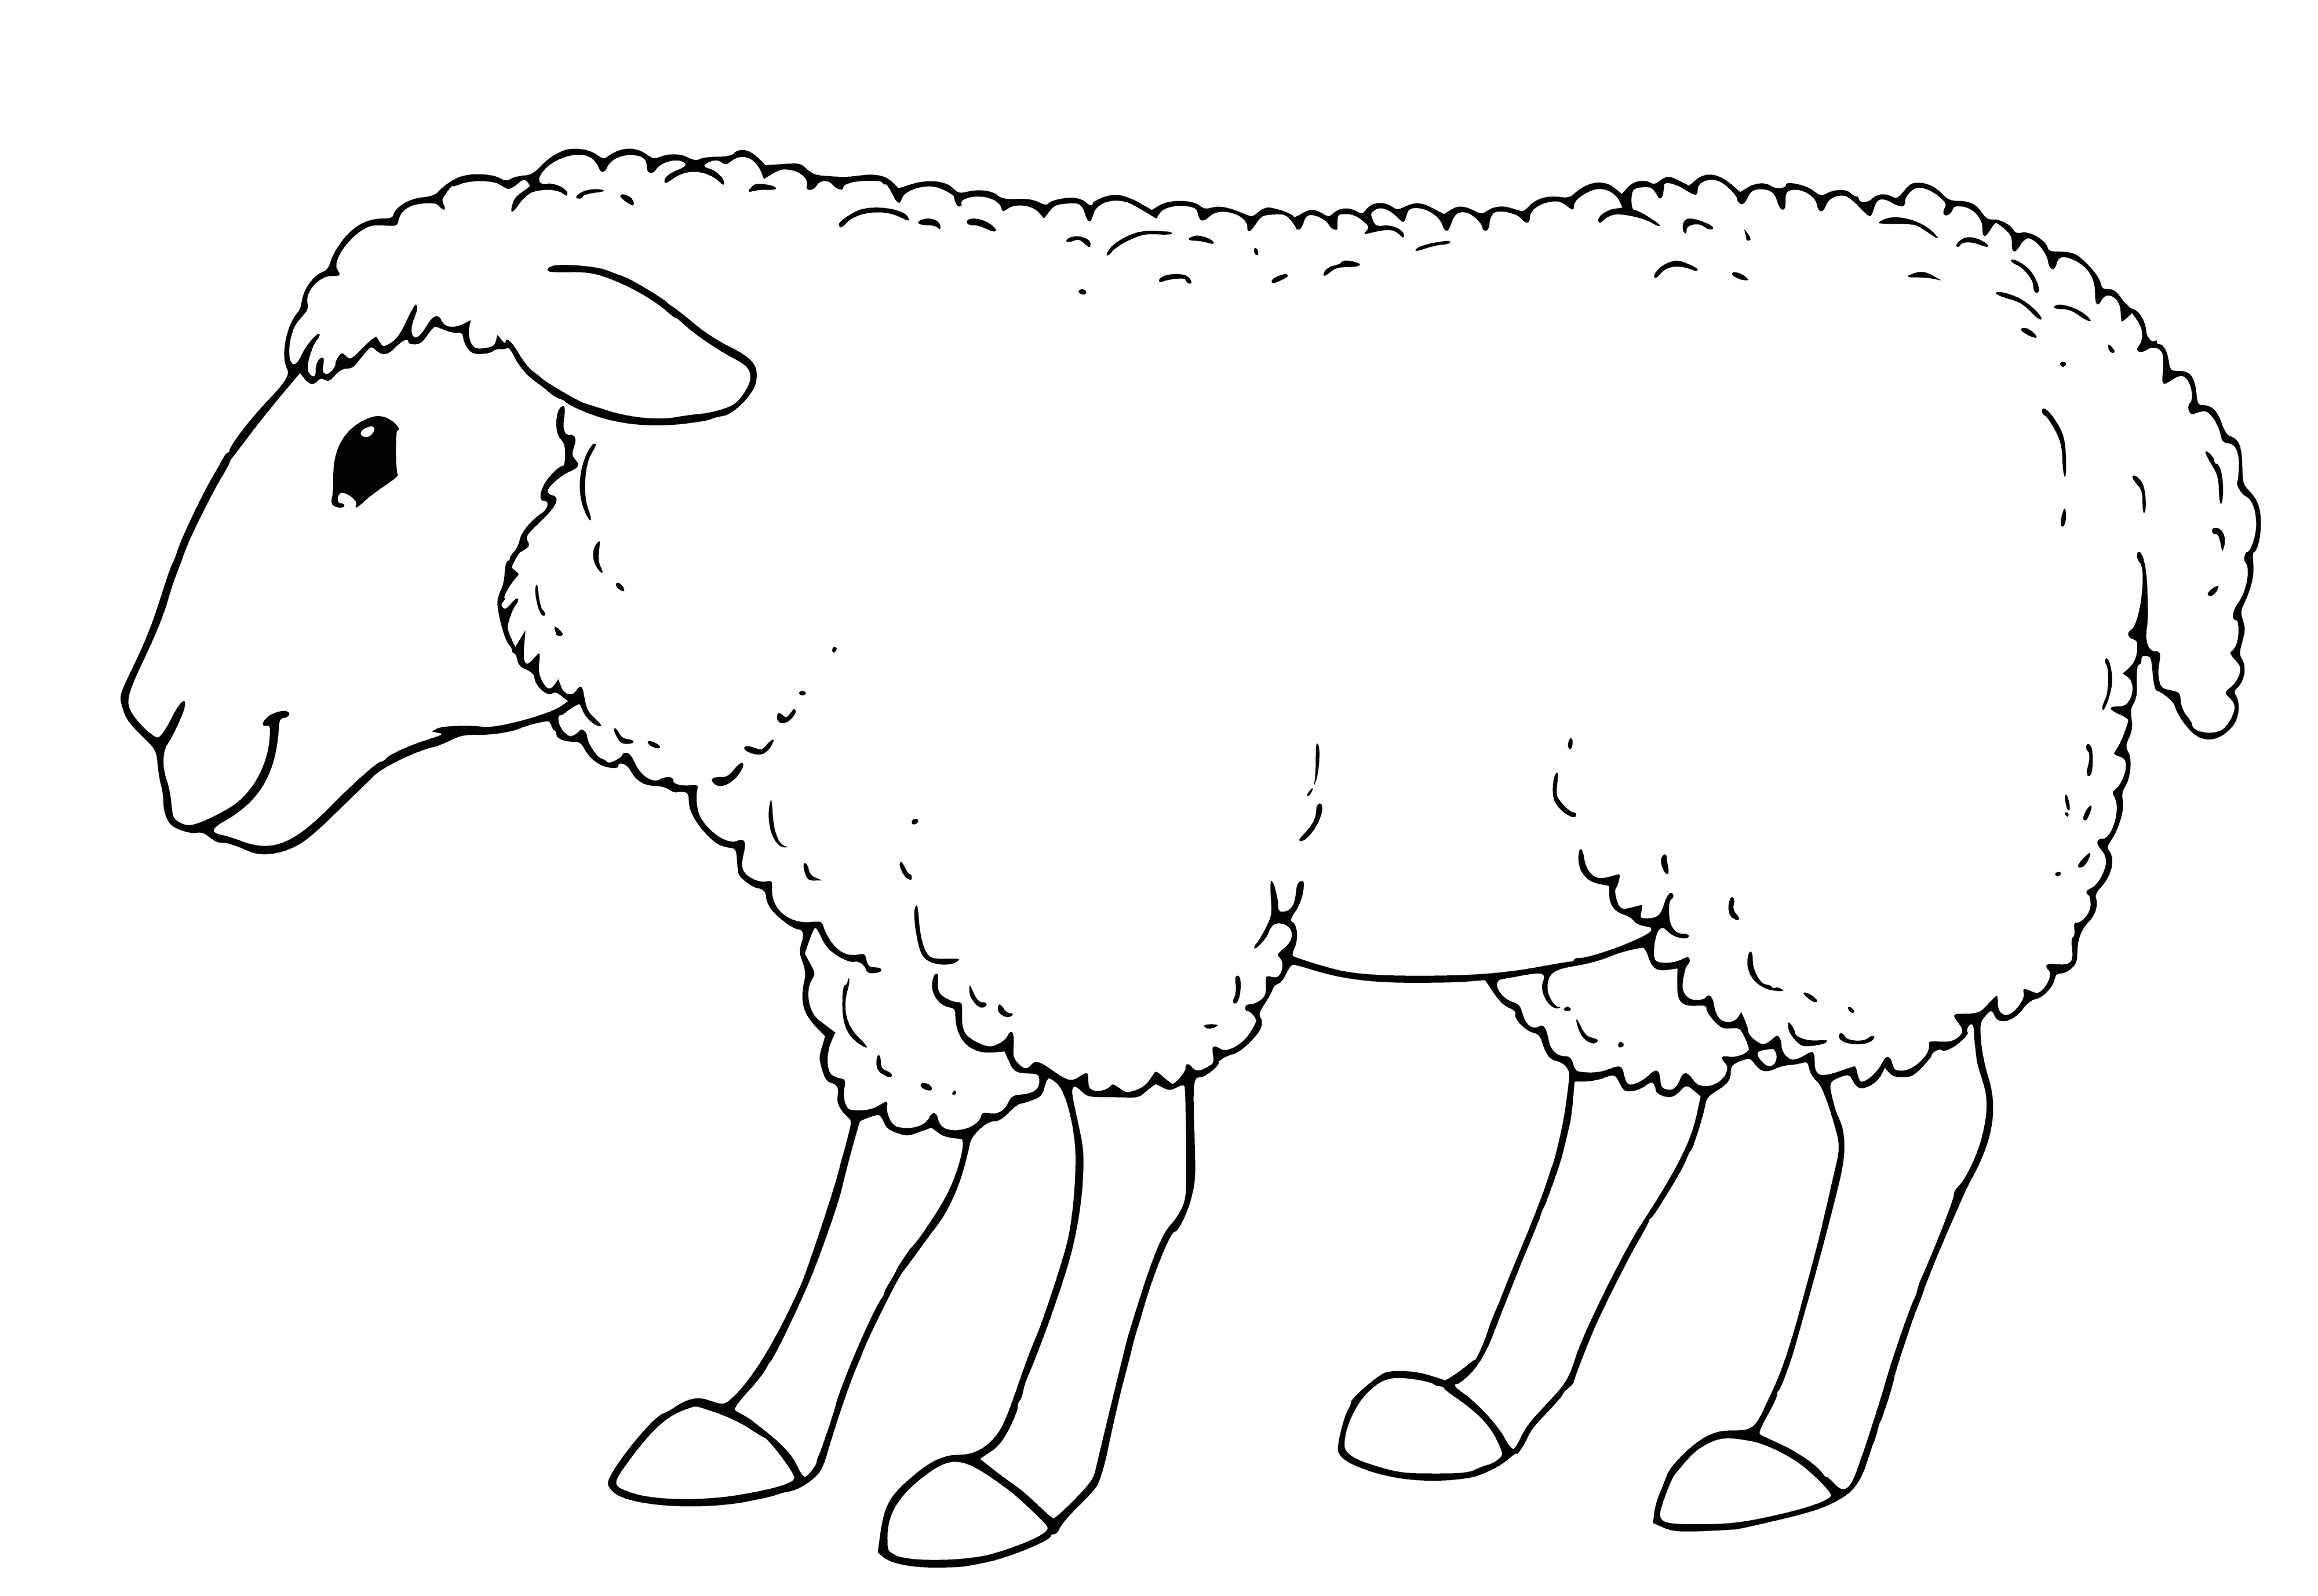 coloring page: Lamb & goat on coloring page, lamb smiling & goat gazing - a peaceful scene.